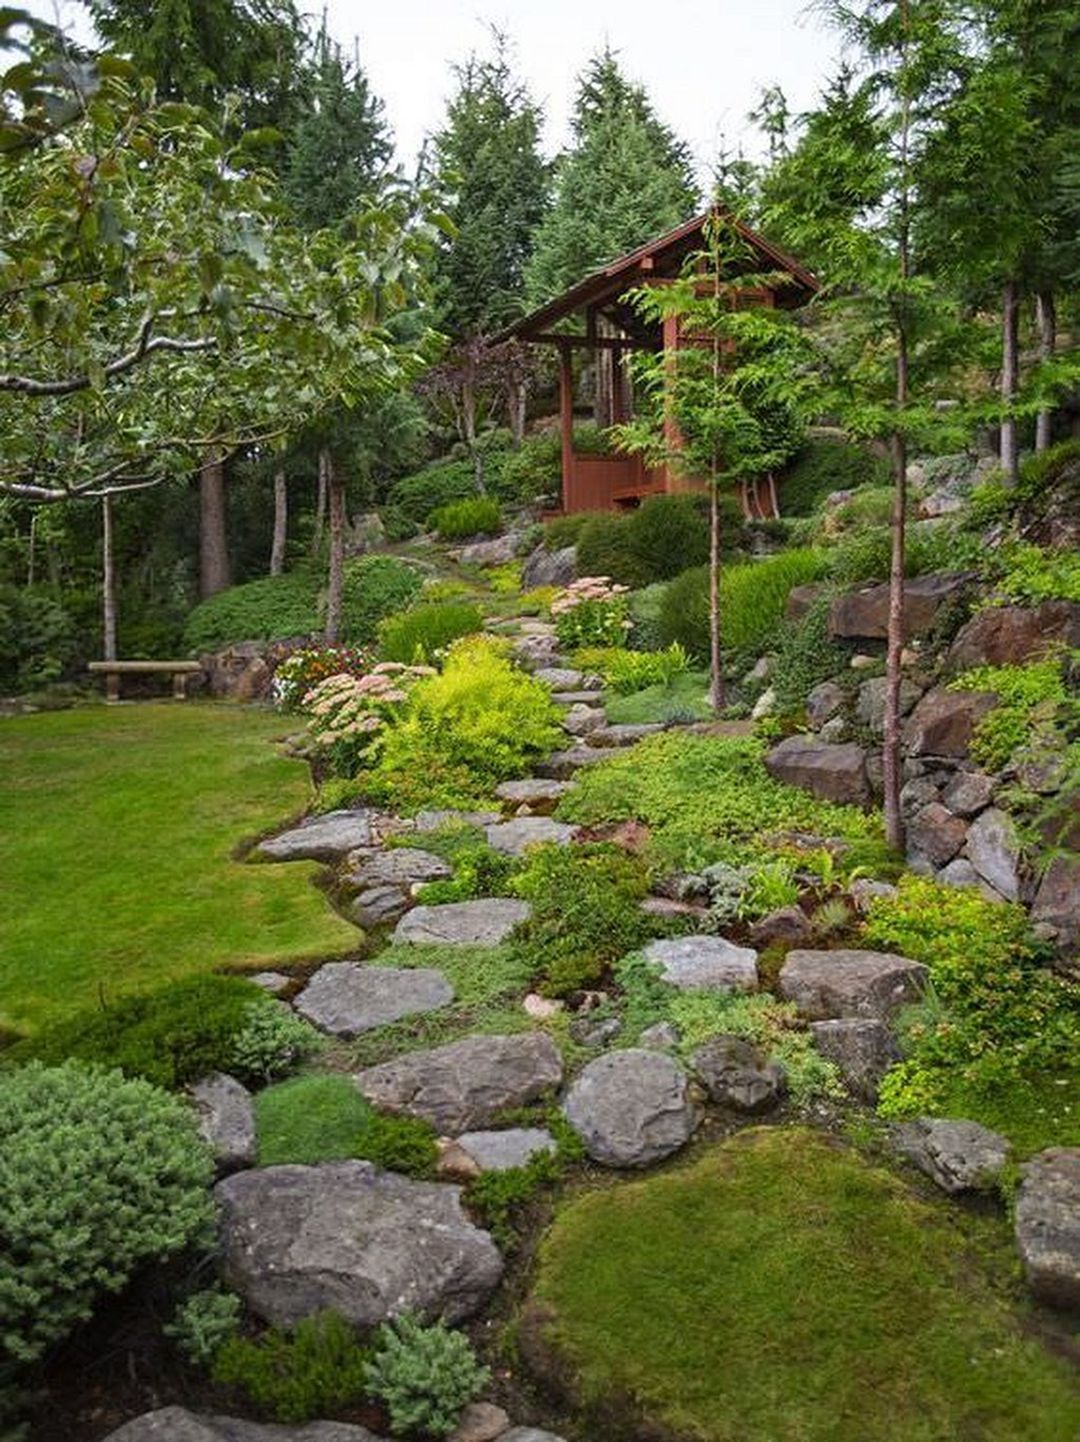 20 Wonderful Rock Garden Ideas To Make Your Landscaping More Awesome -   16 garden design Luxury landscapes ideas